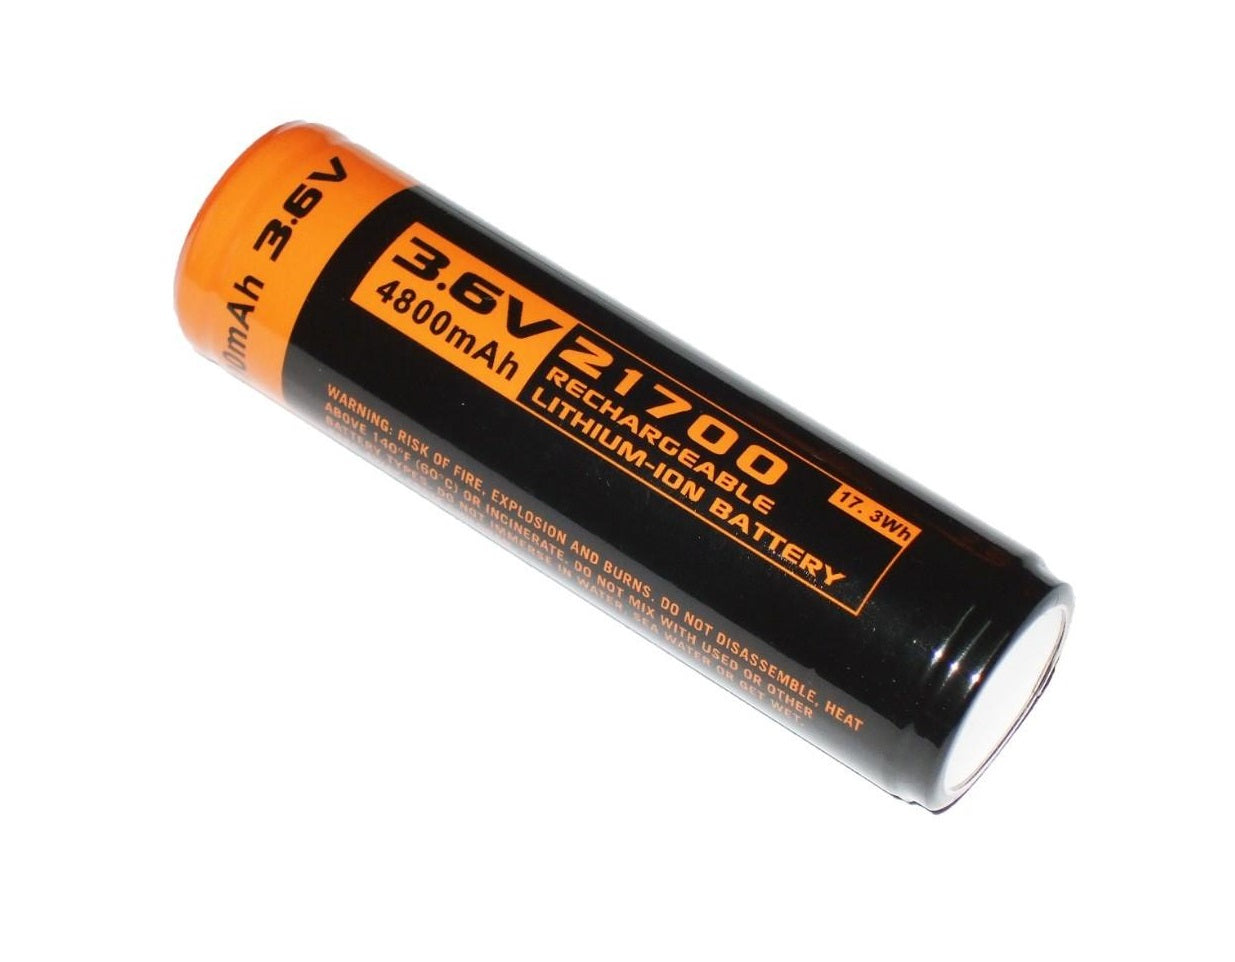 New Manker 21700 4800mAh 3.6V Protected Button Top Rechargeable Battery Cell